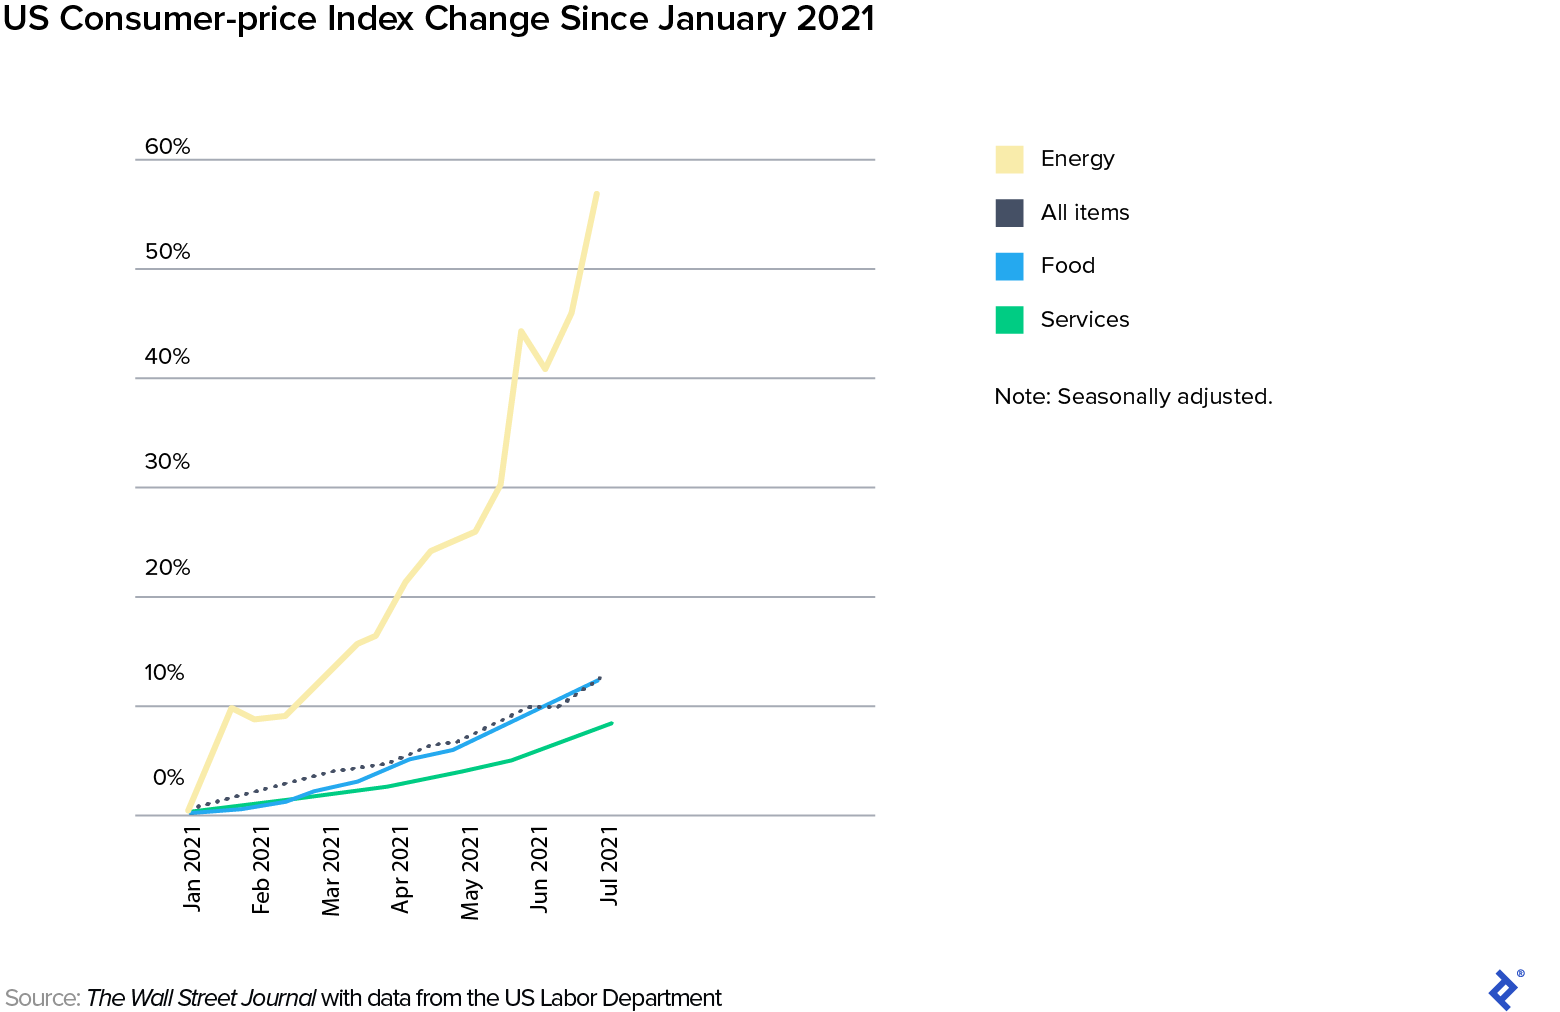 Chart showing the dramatic 12.6% rise in the US Consumer Price Index from January 2021 through June 2022 and breaking out several component parts. Energy prices have experienced the sharpest increase, climbing by almost 60%, while increases in the prices of food and services have been more in line with the index.